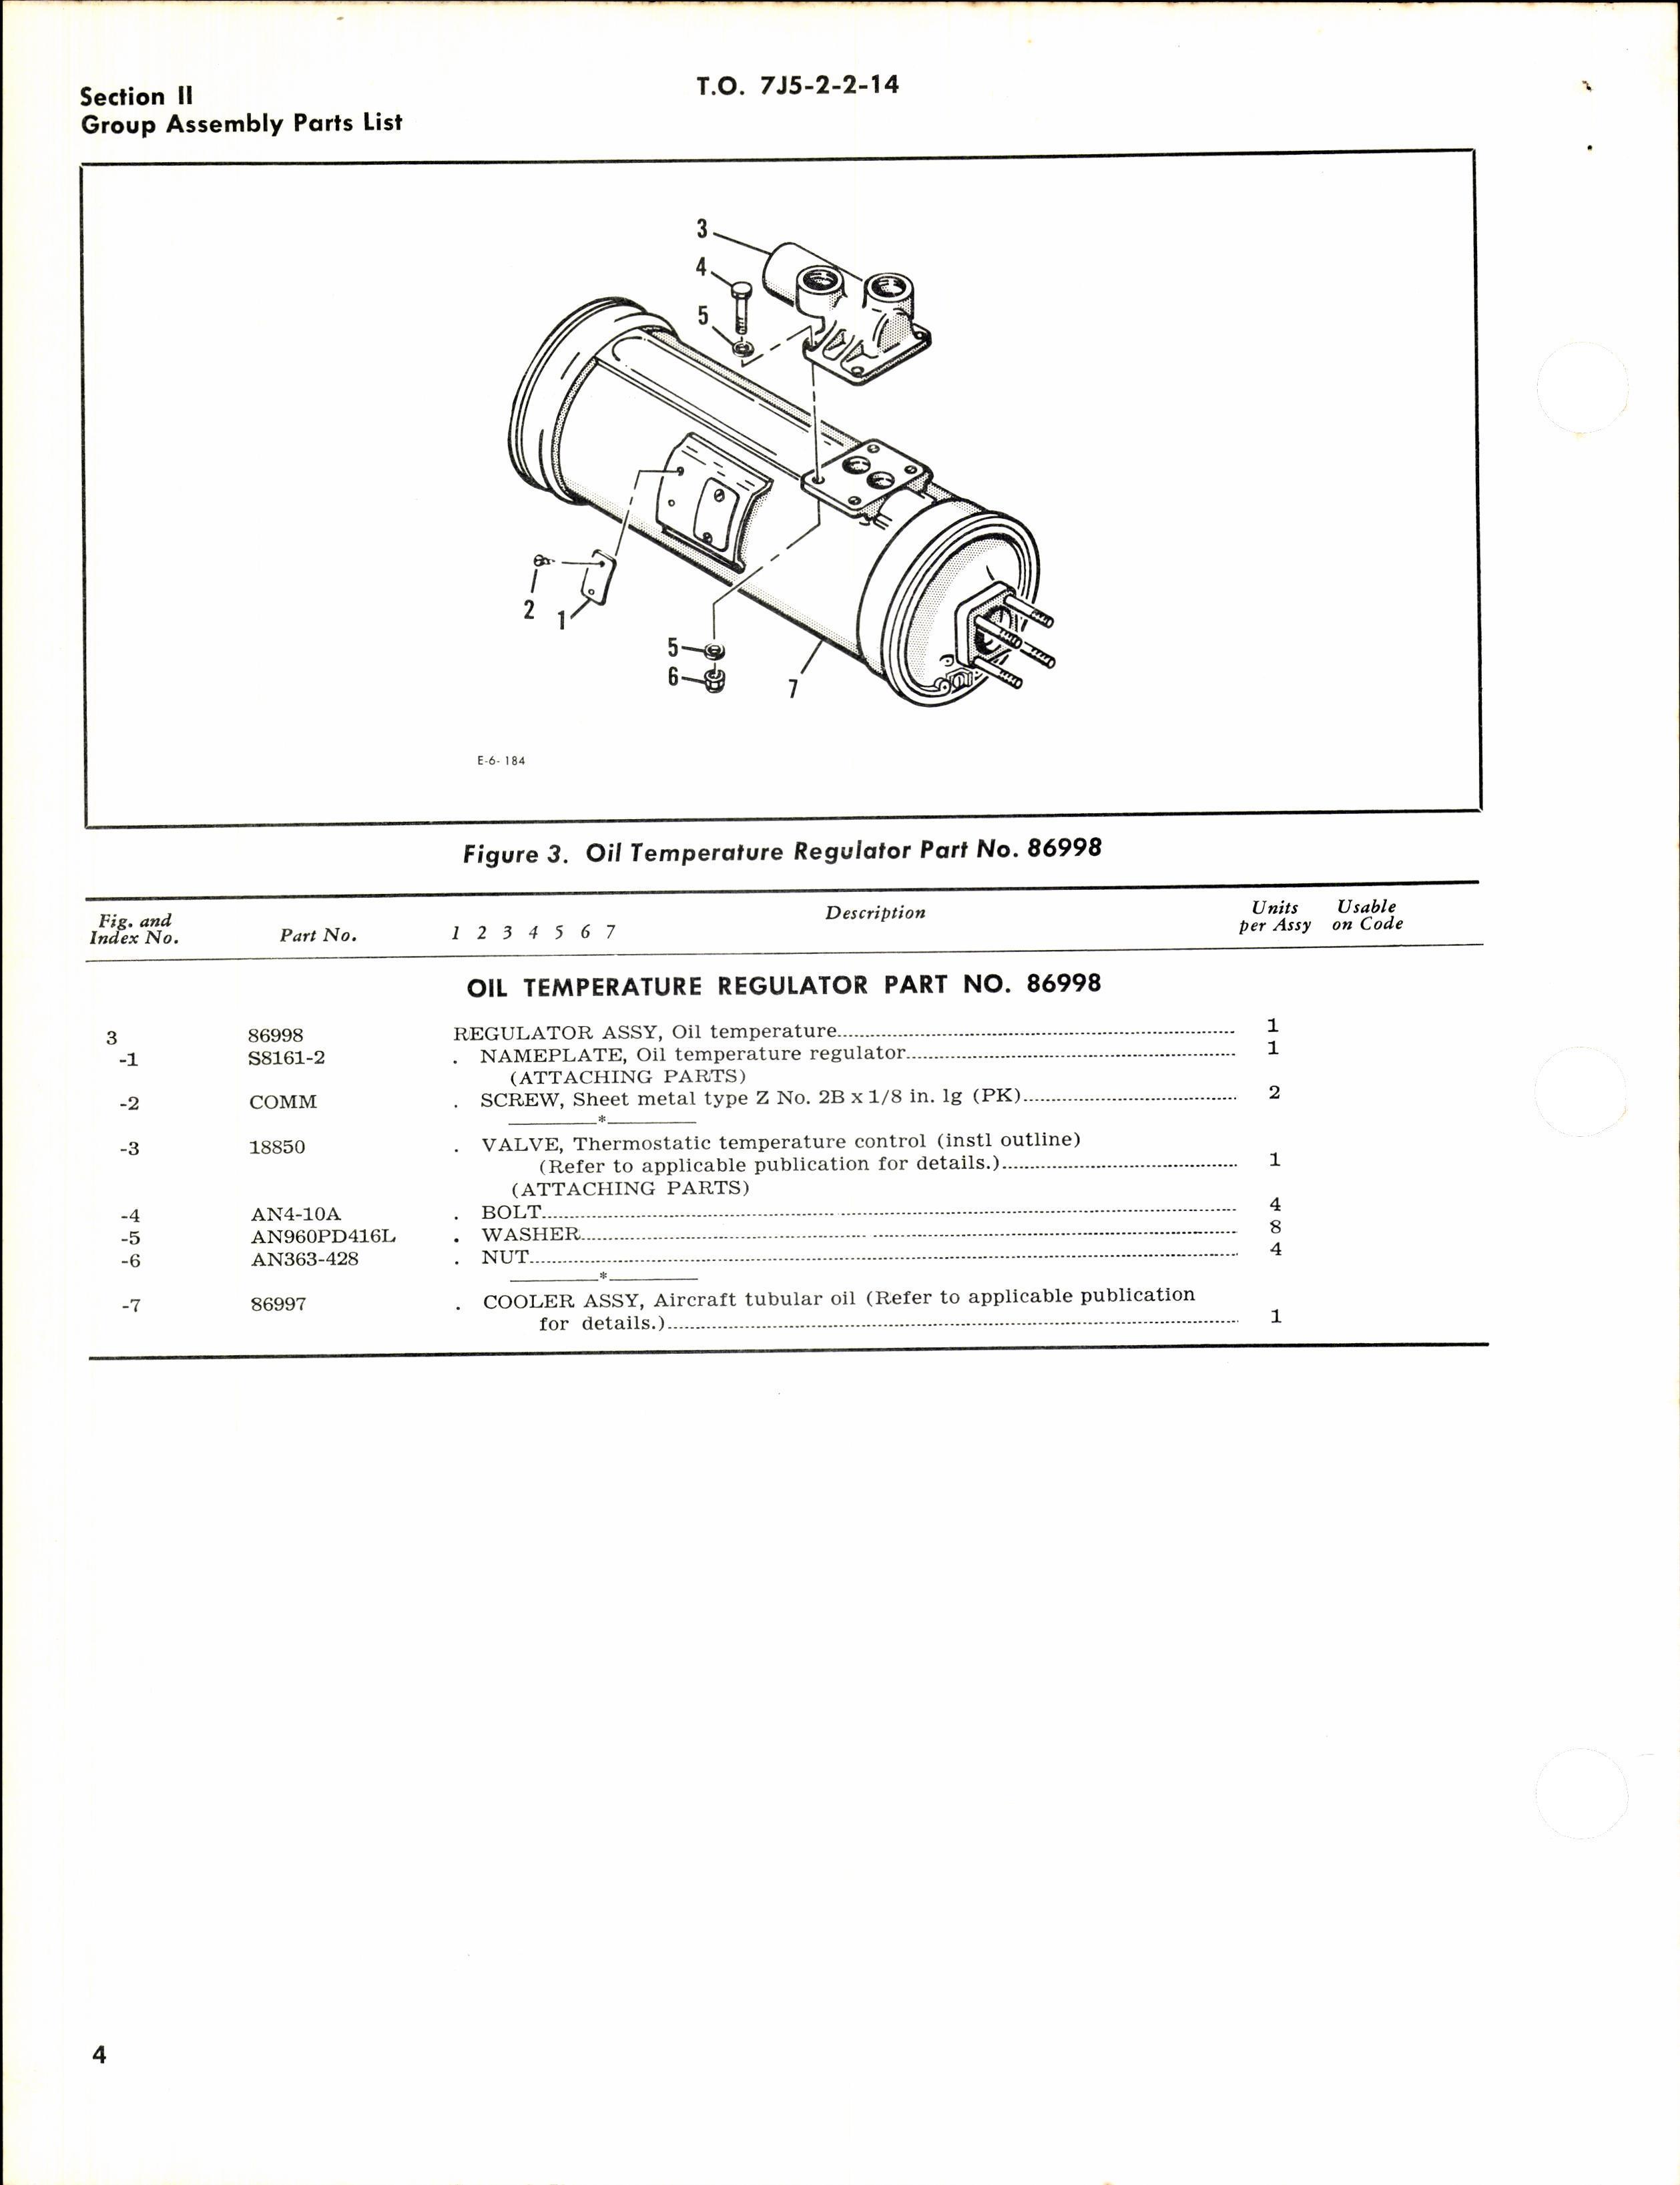 Sample page 6 from AirCorps Library document: Illustrated Parts Breakdown for Oil Temperature Regulators, Heat Exchanges, and Fuel Temperature Regulators 